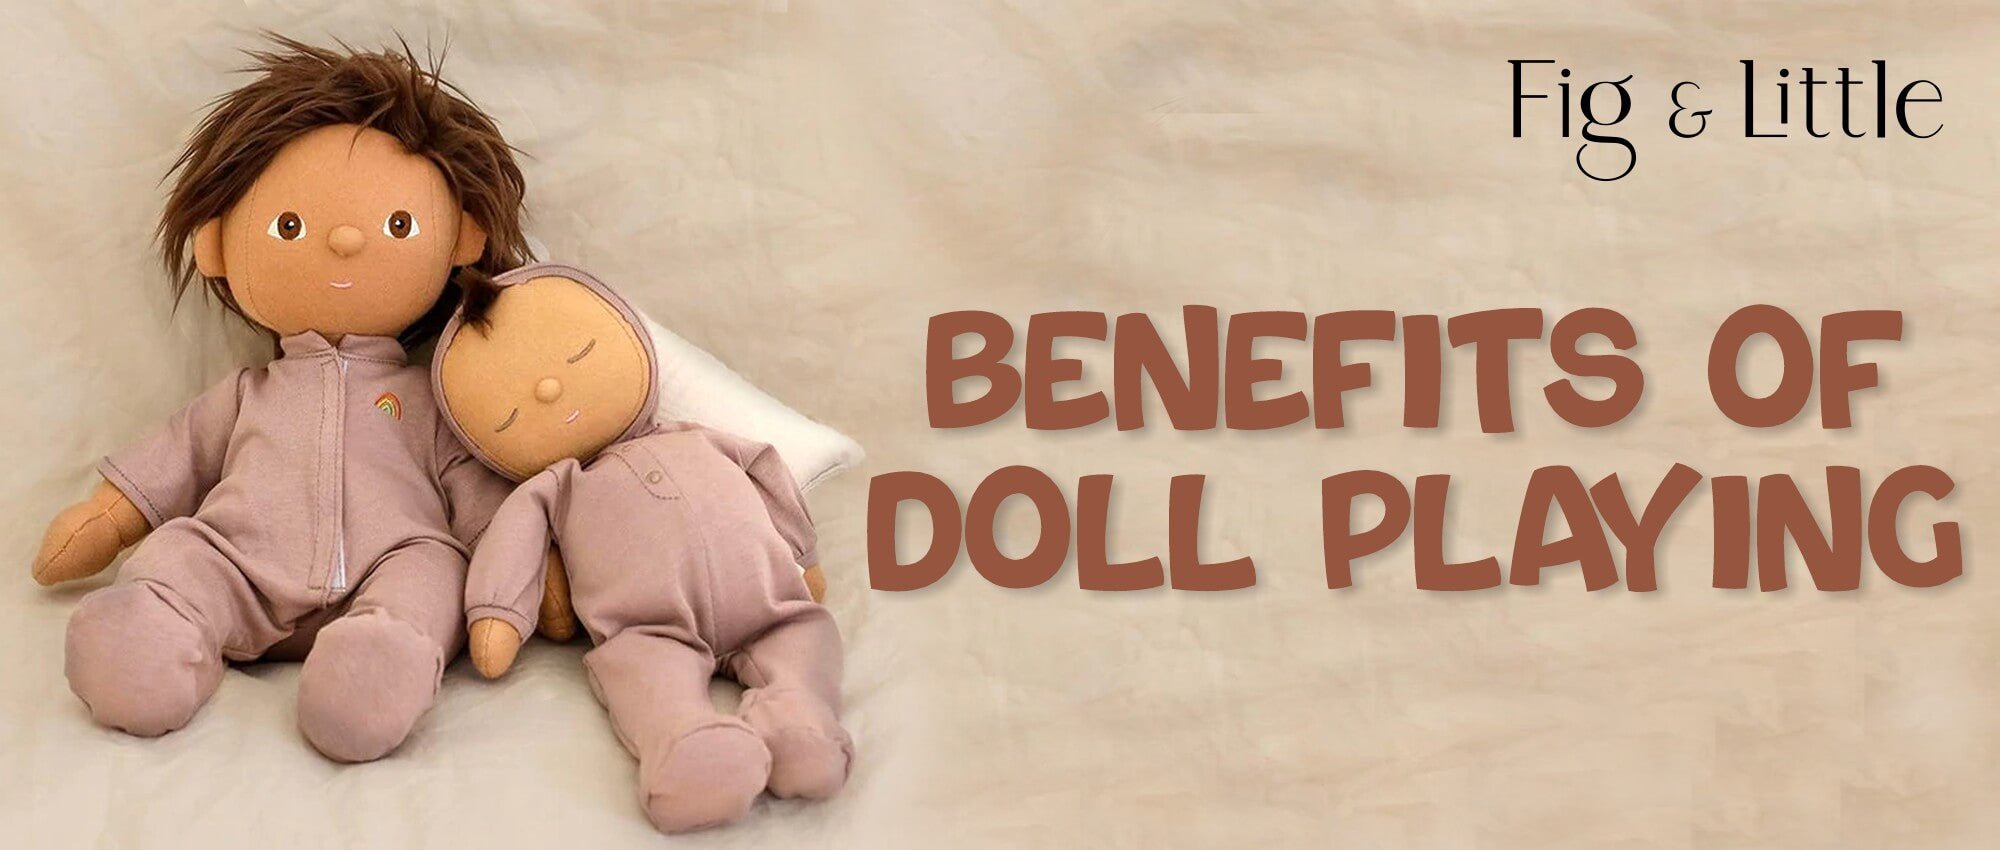 BENEFITS OF DOLL PLAYING